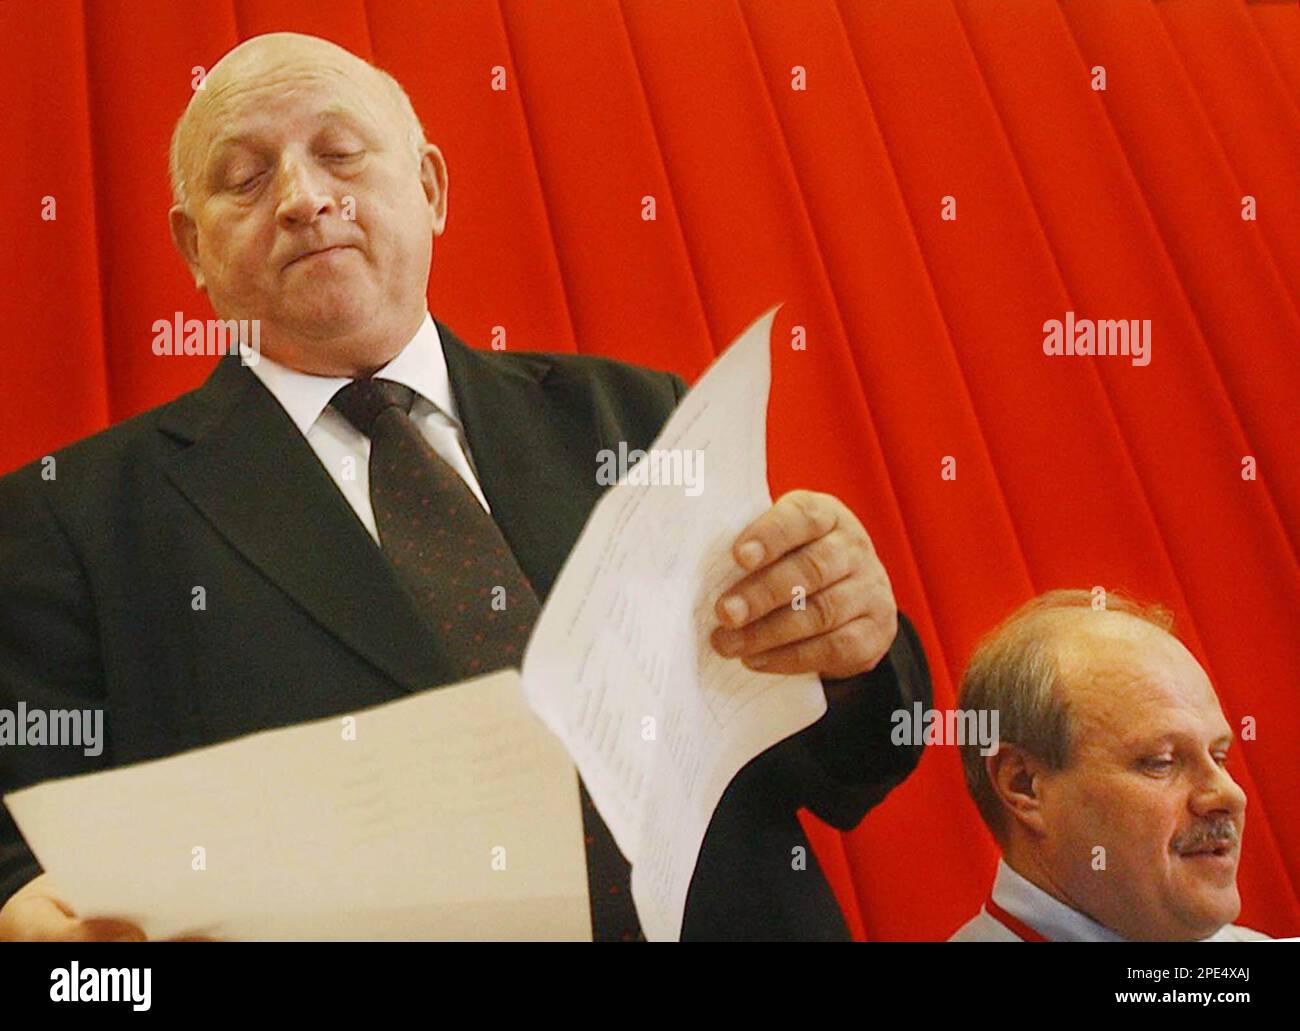 Jozef Oleksy, outgoing chairman of Poland's embattled governing party, the  Democratic Left Alliance, looks over the text of his speech before  addressing a party convention in Warsaw, Poland, Sunday May 29, 2005.